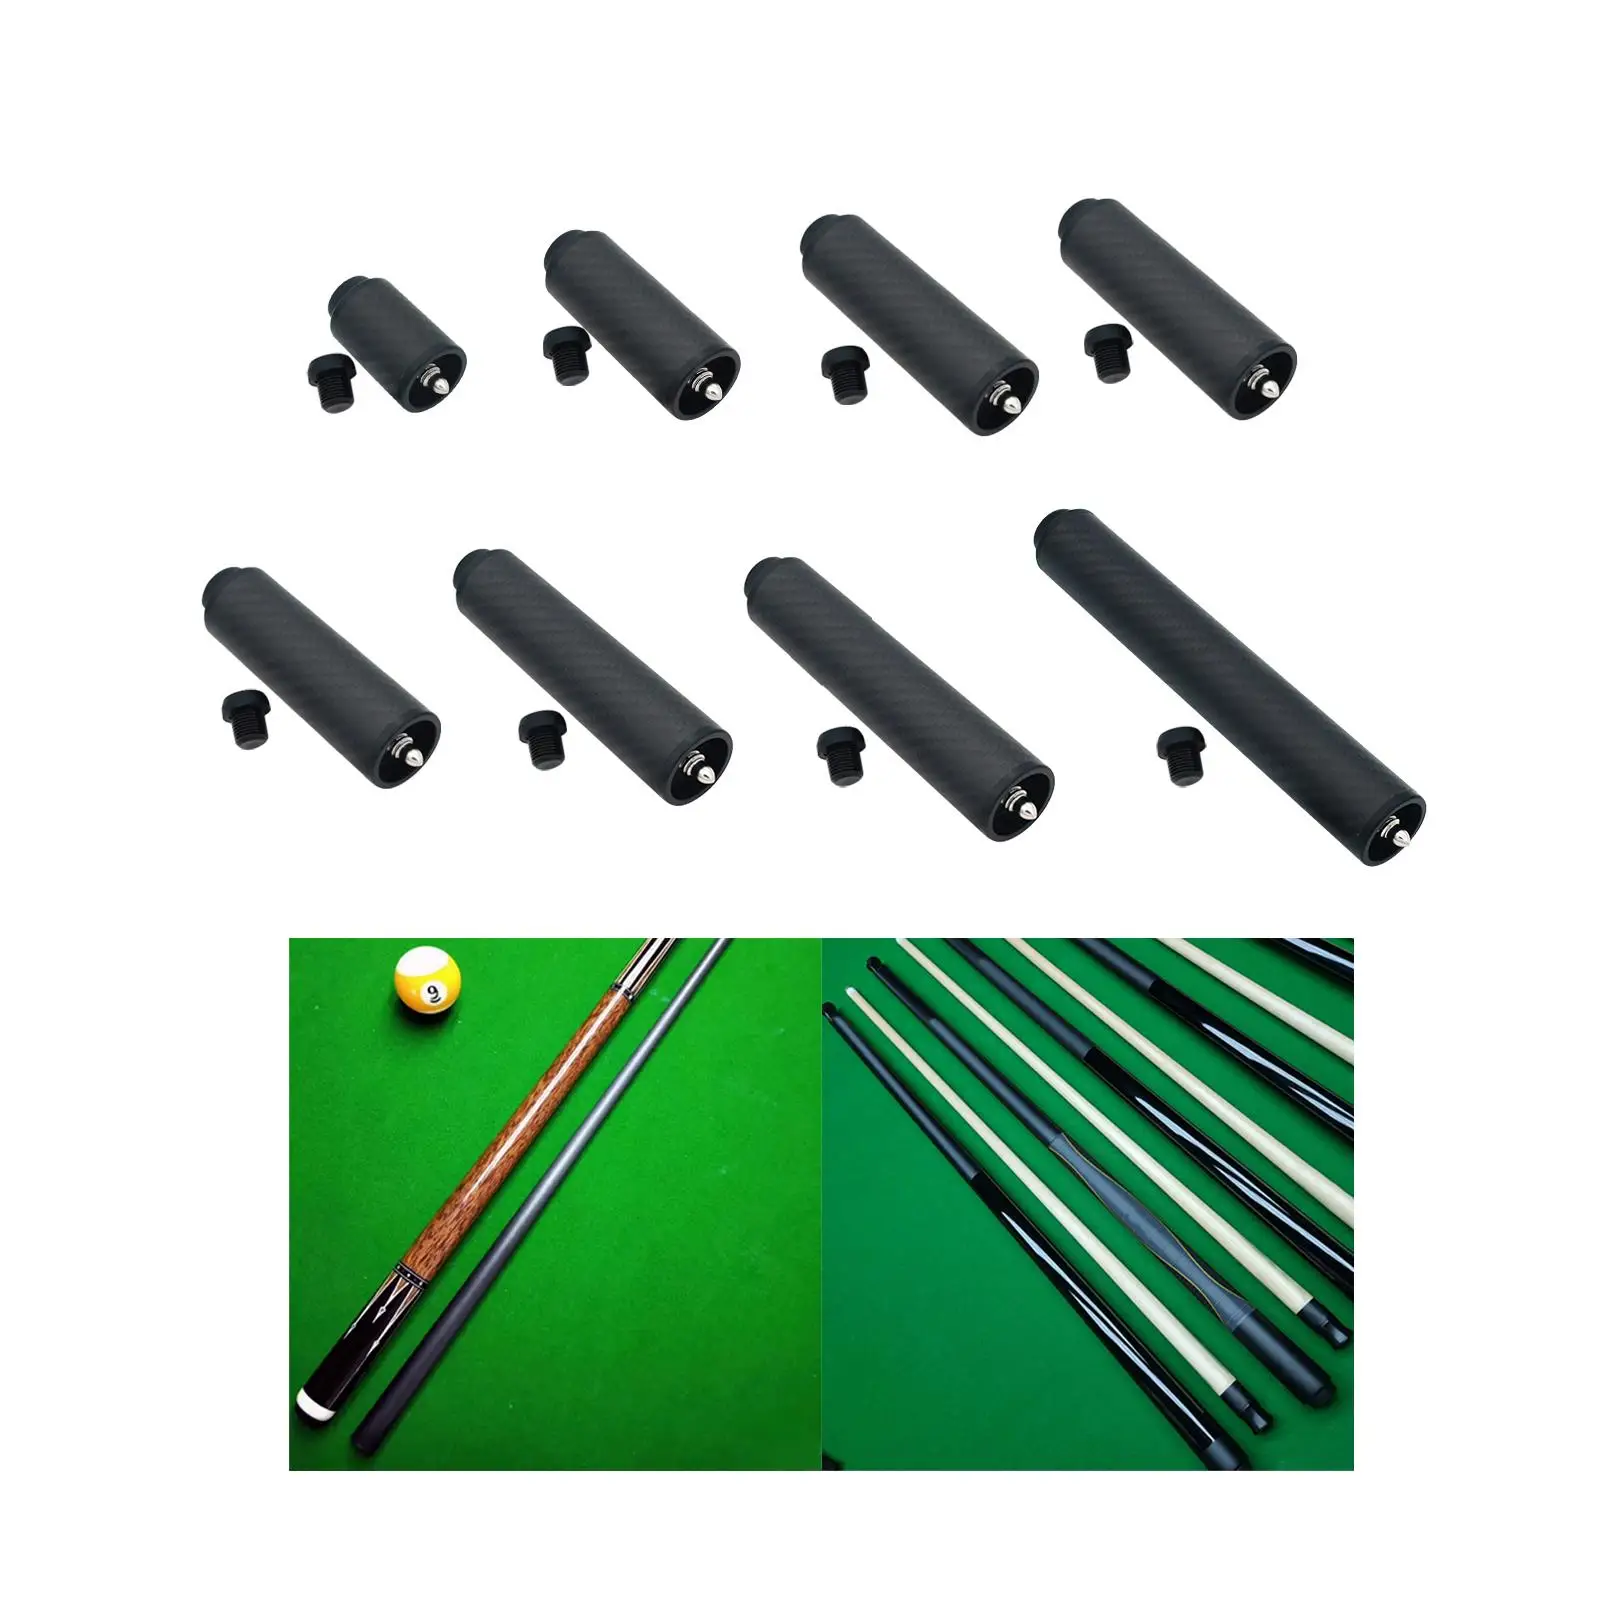 Billiards Pool Cue Extension Weights Replacement Cue Stick Extender Snooker Cue Long Extension for Enthusiast Athlete Beginners